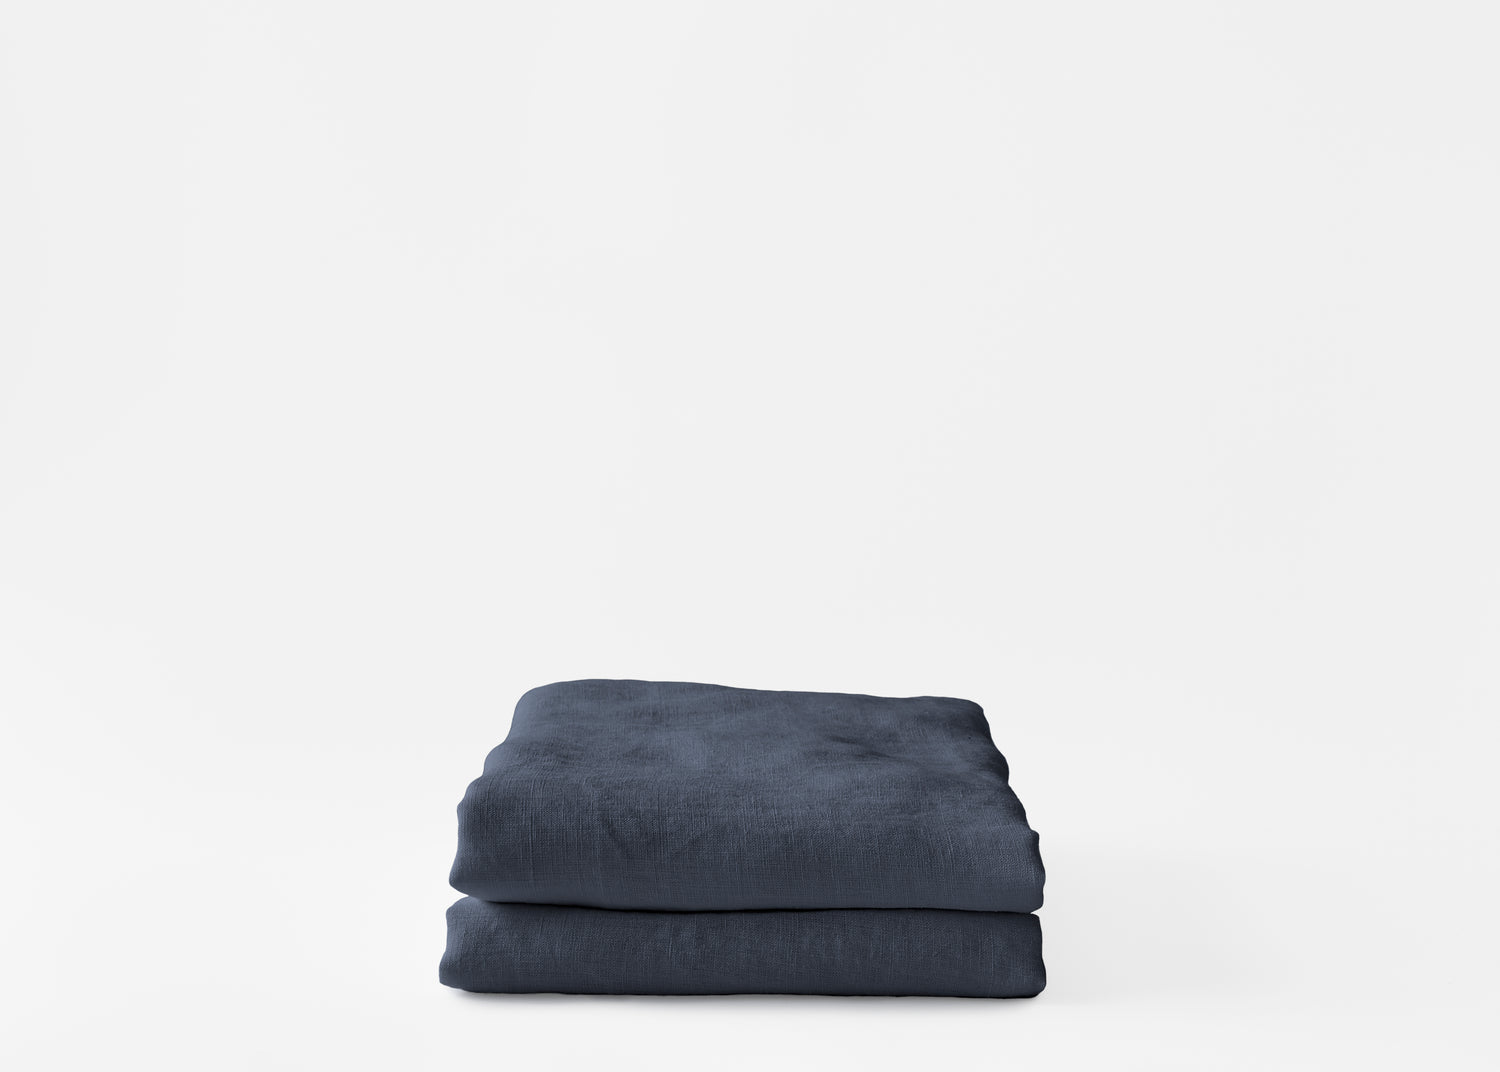 folded hemp pillowcases in a muted navy color